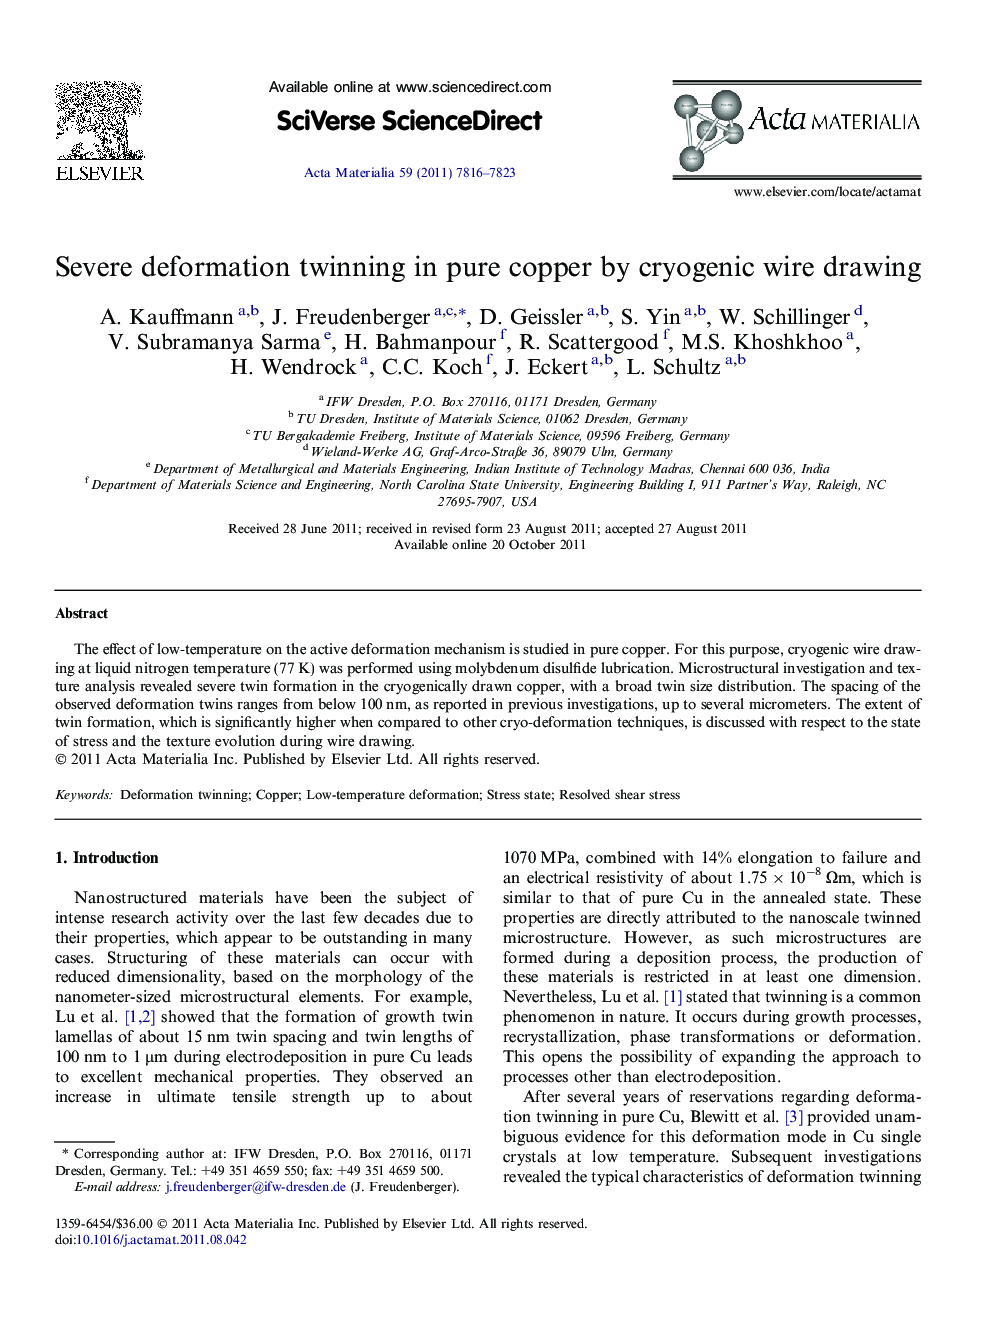 Severe deformation twinning in pure copper by cryogenic wire drawing